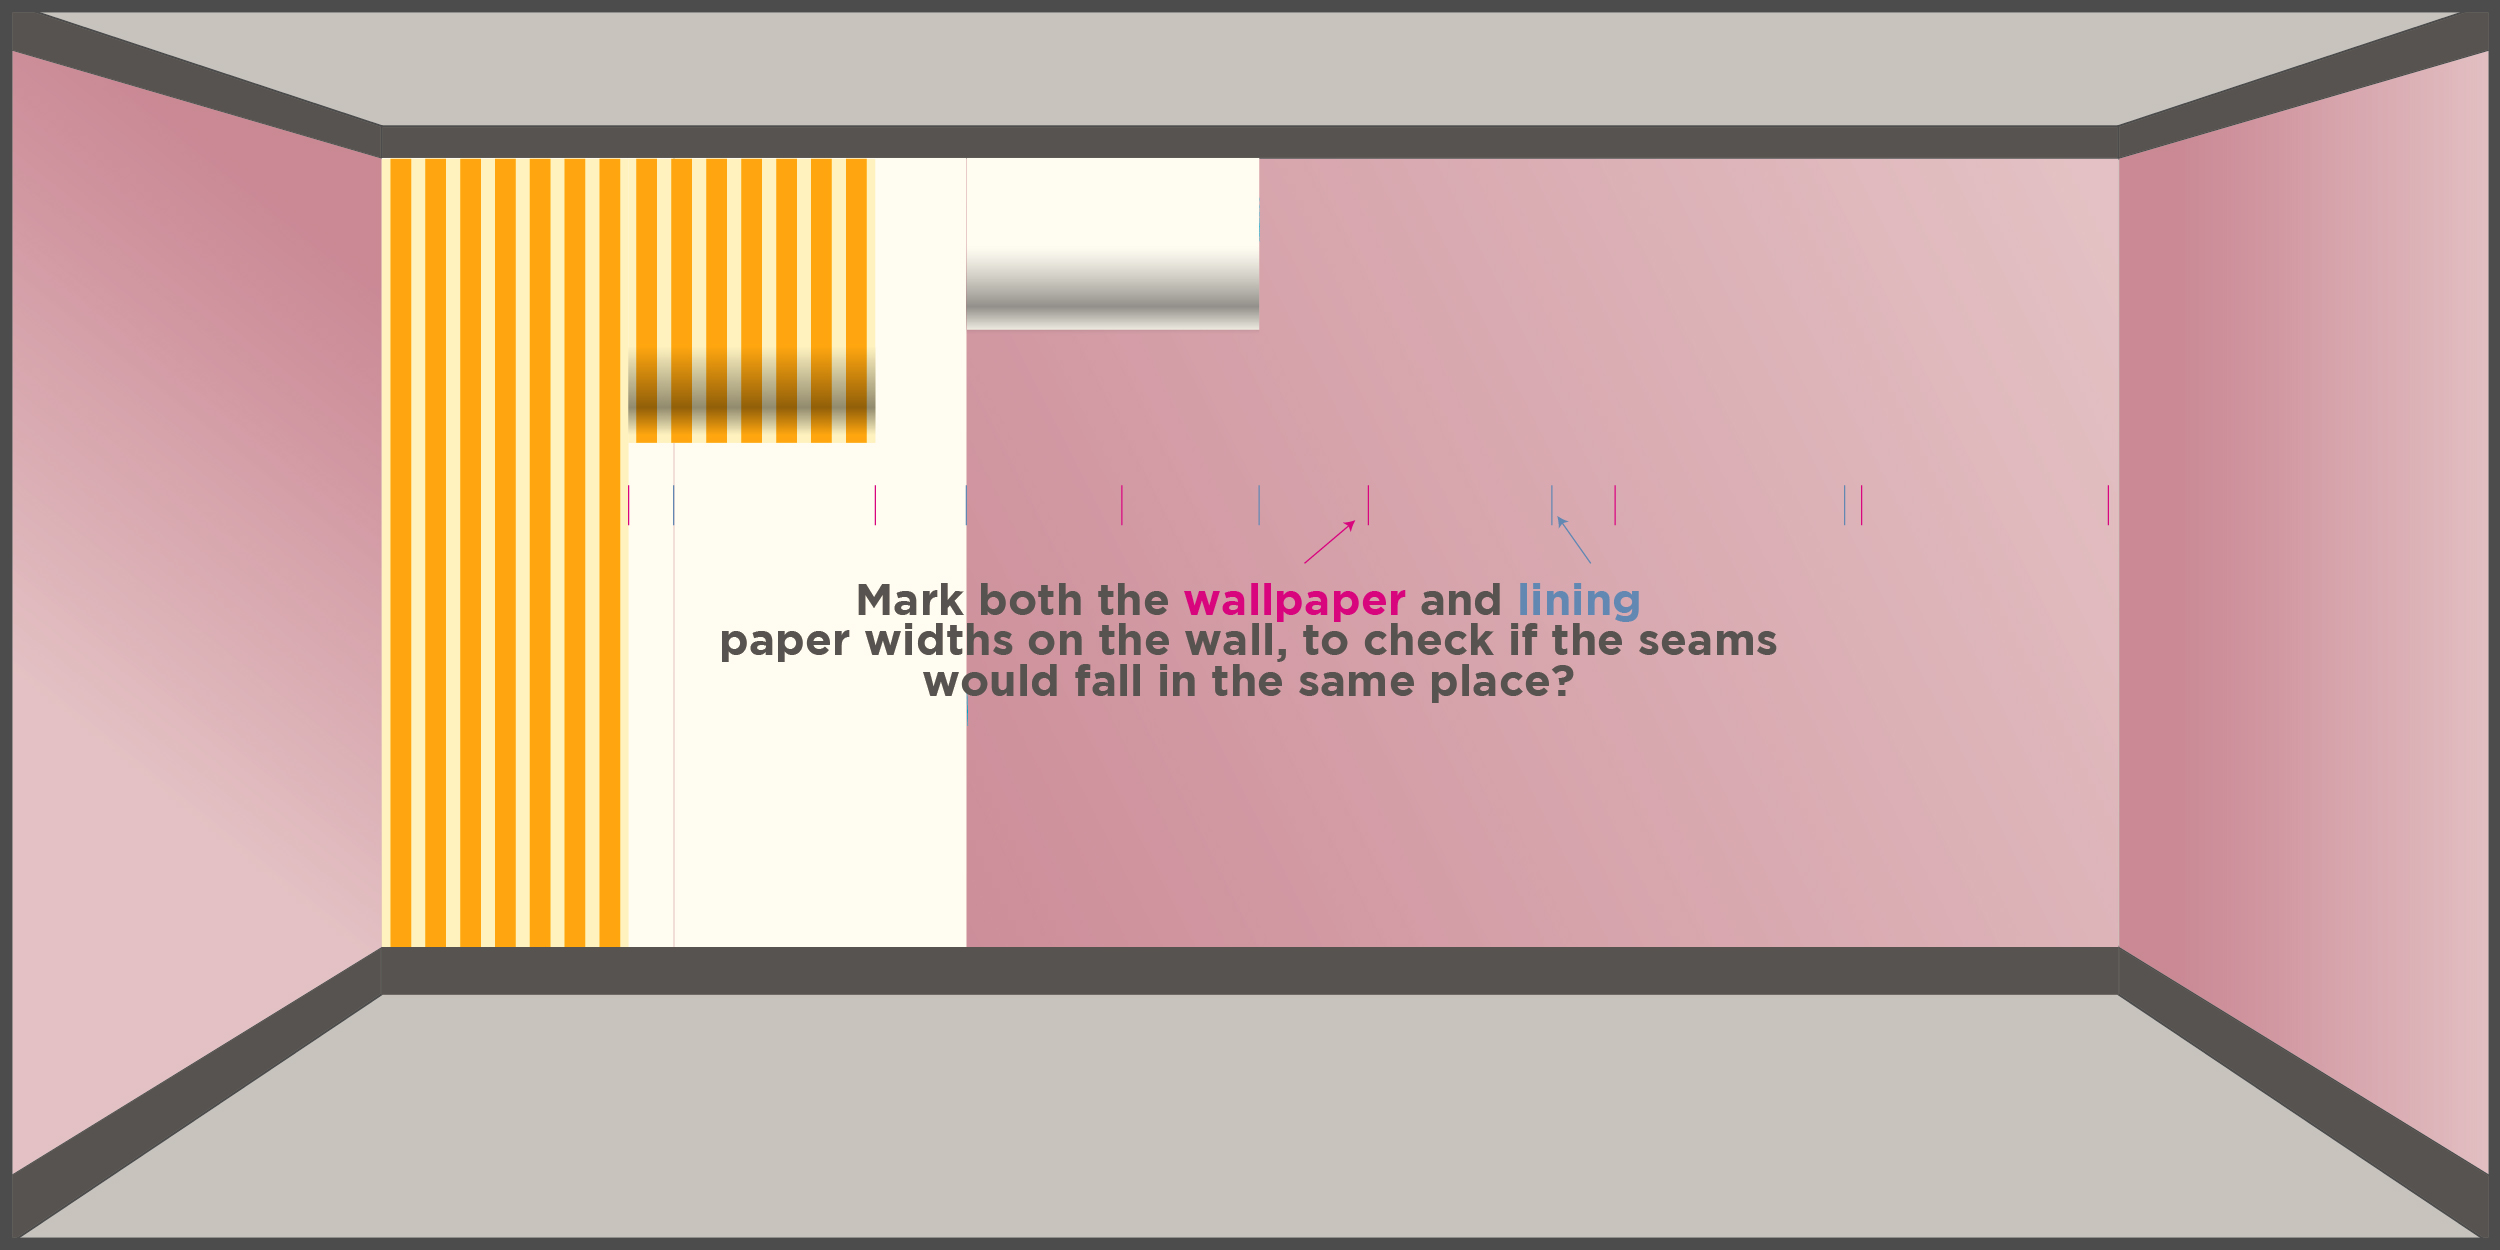 illustration to show how to mark wallpaper and lining paper widths